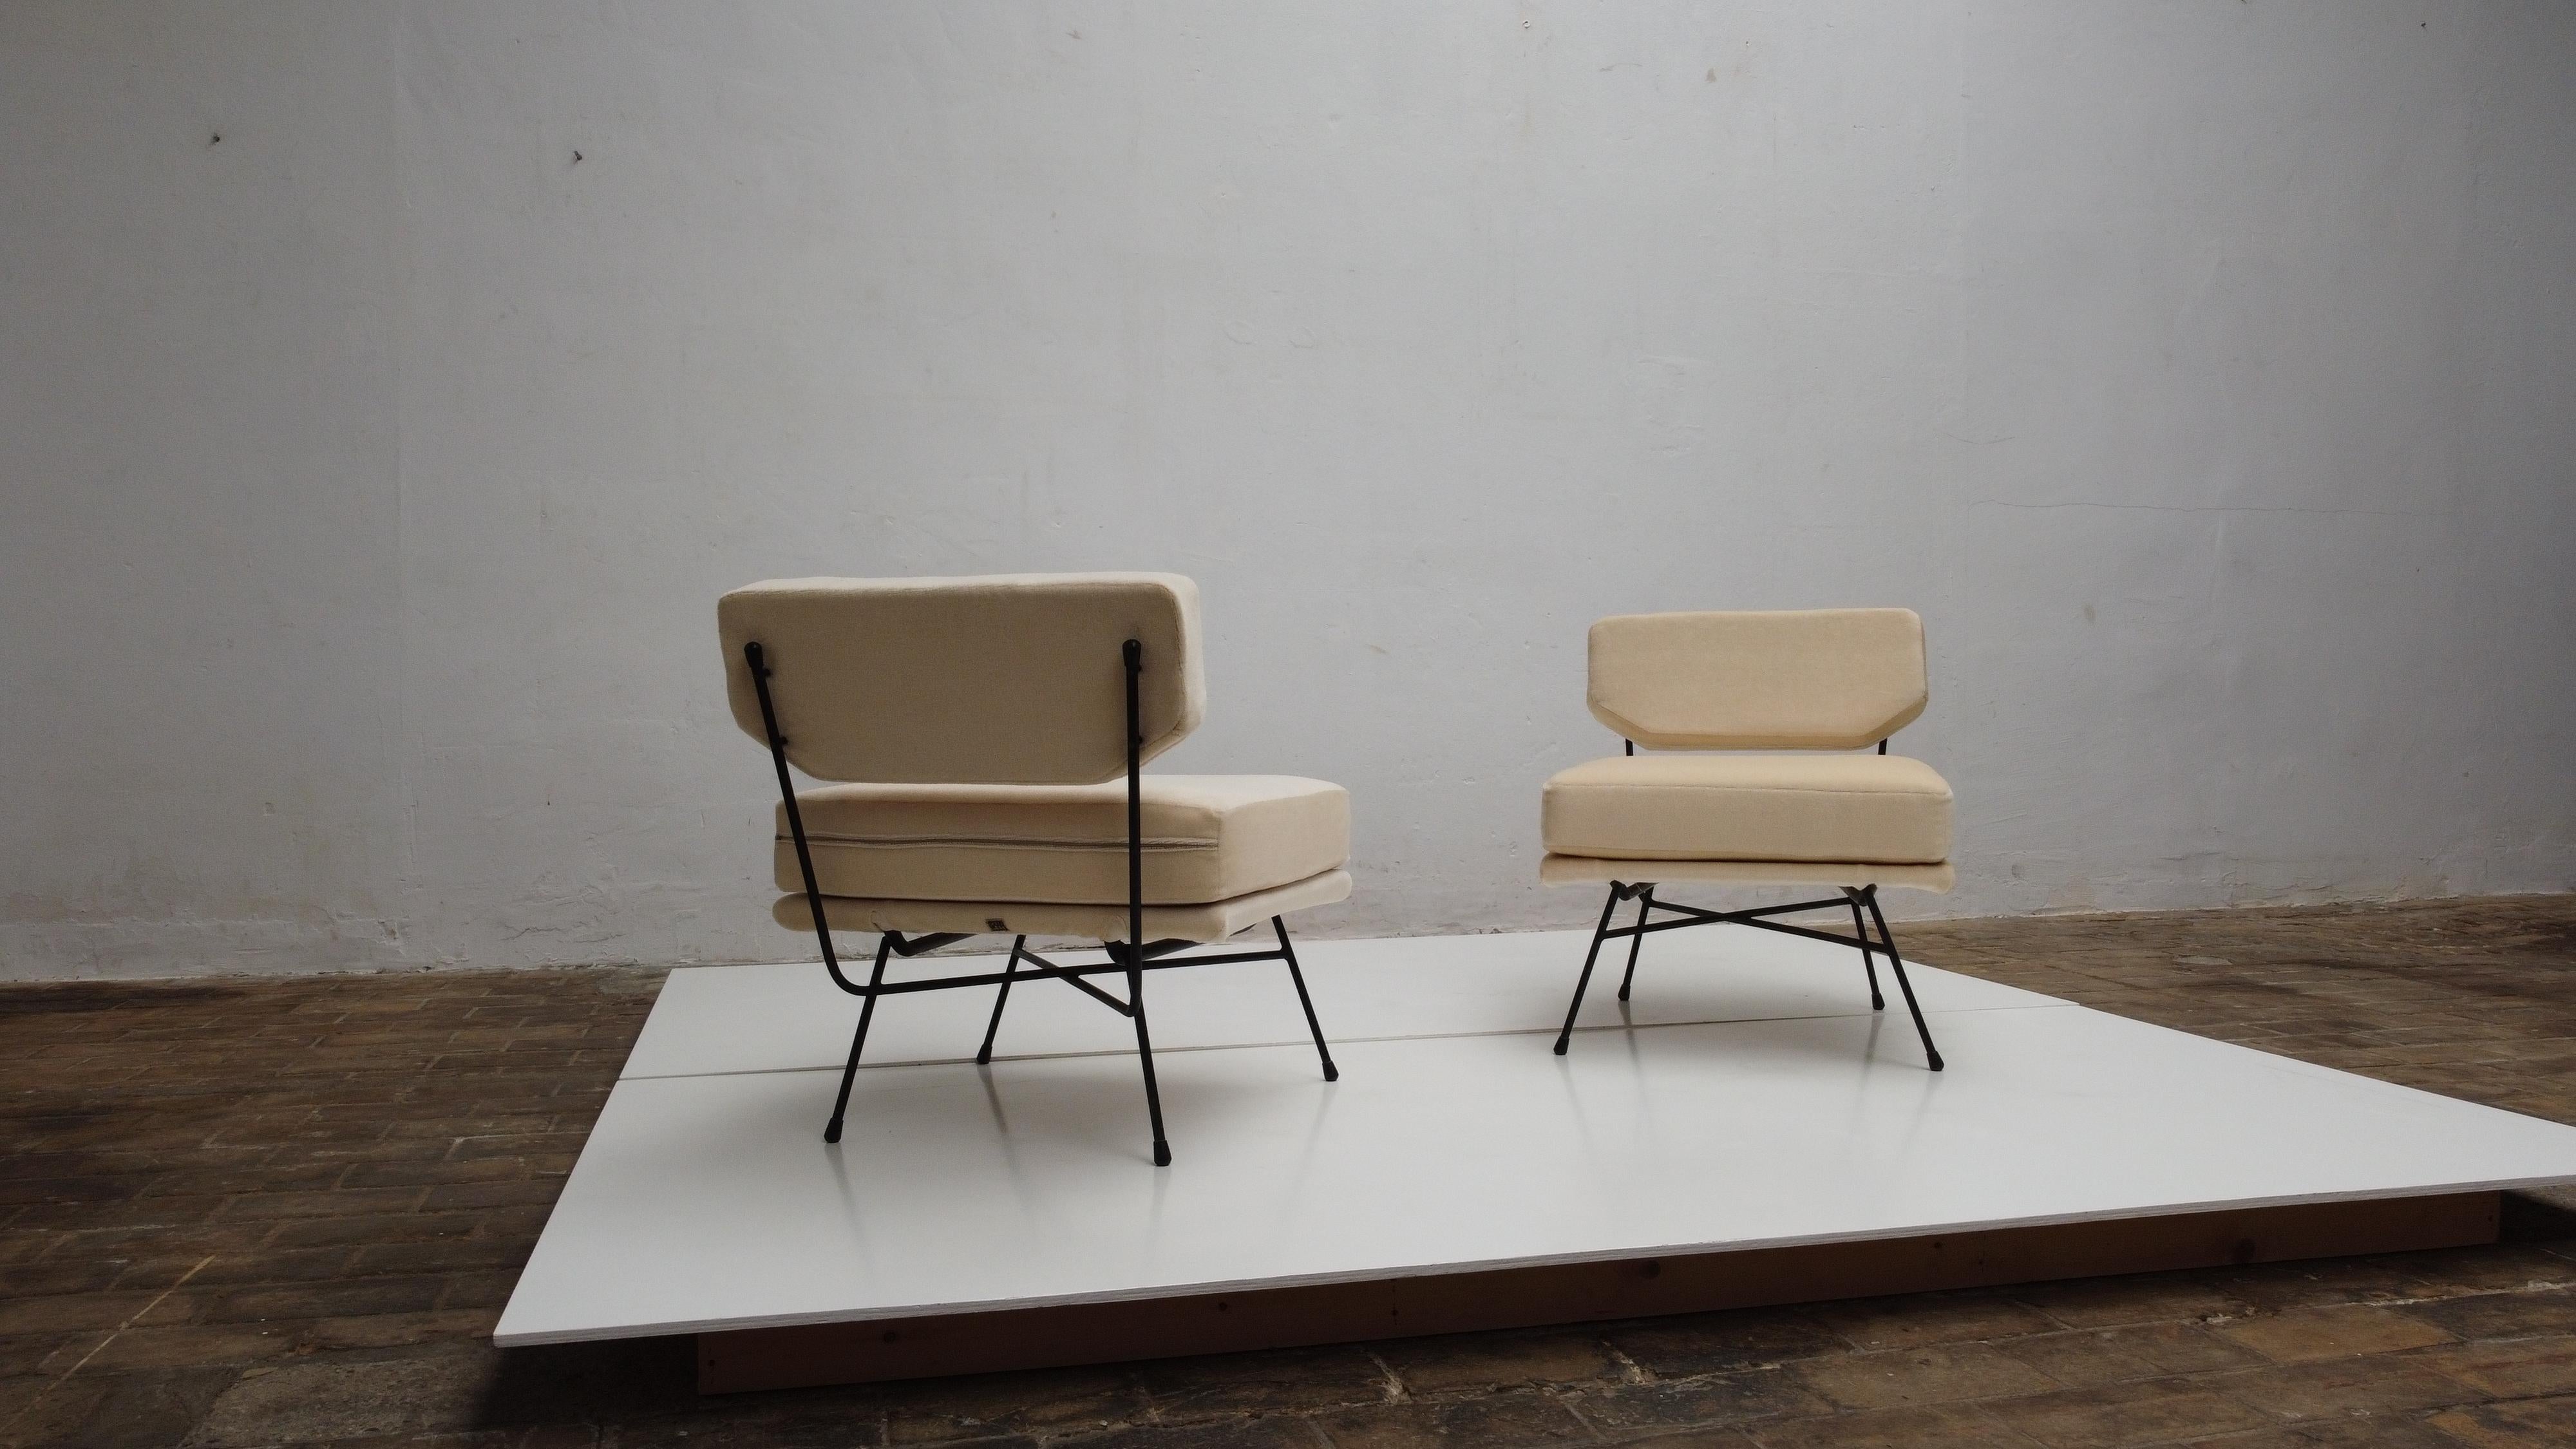 Mid-20th Century Pair of 'Elettra' Lounge Chairs by BBPR, Arflex, Italy 1953, Compasso D'Oro 1954